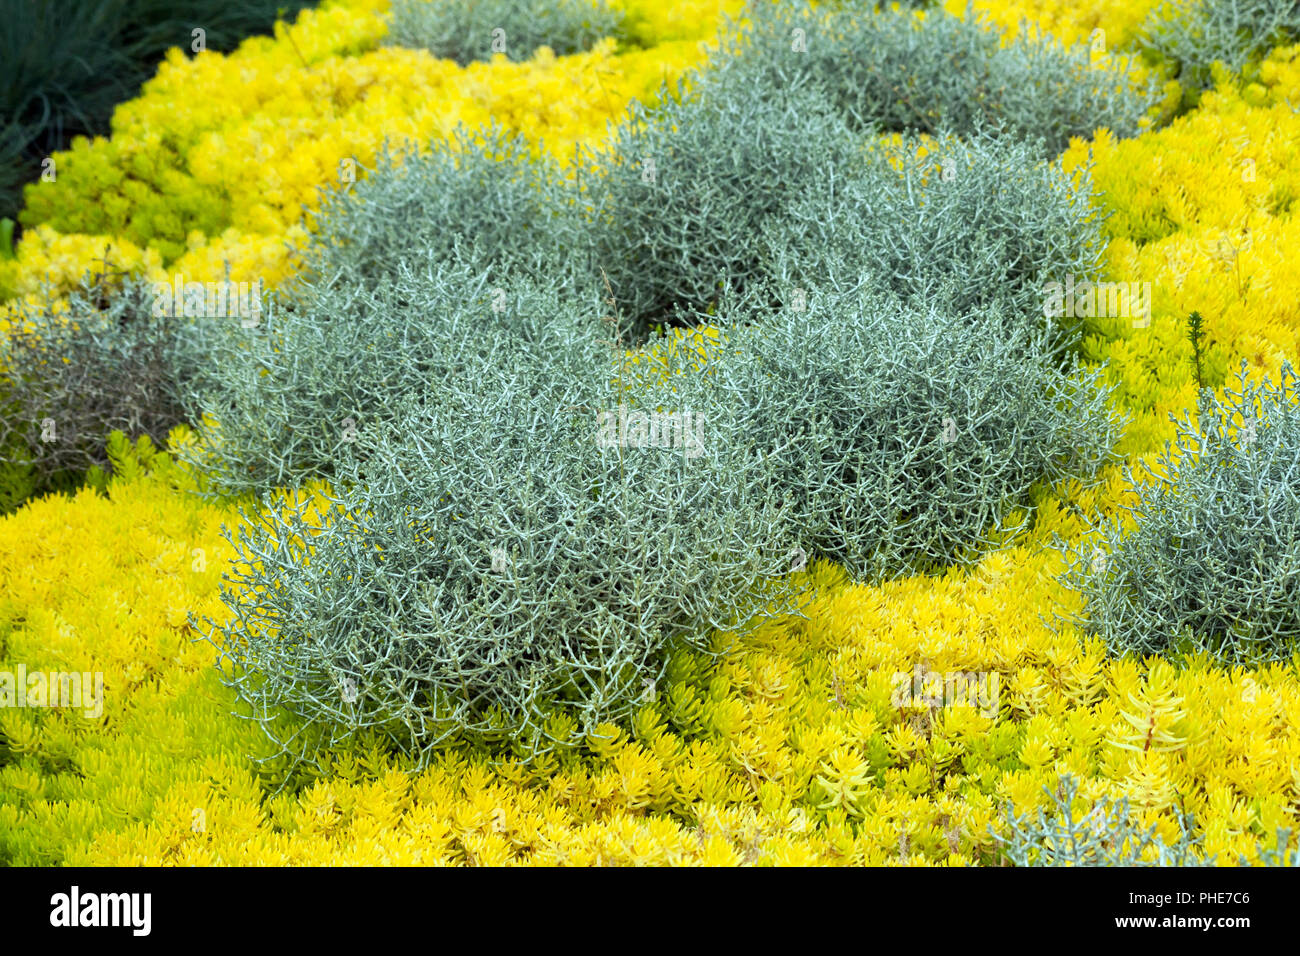 calocephalus brownii, a beautiful, unusual plant for home and garden, grows gray-silvery bushes surrounded by yellow sedum reflexum Angelina, Stock Photo